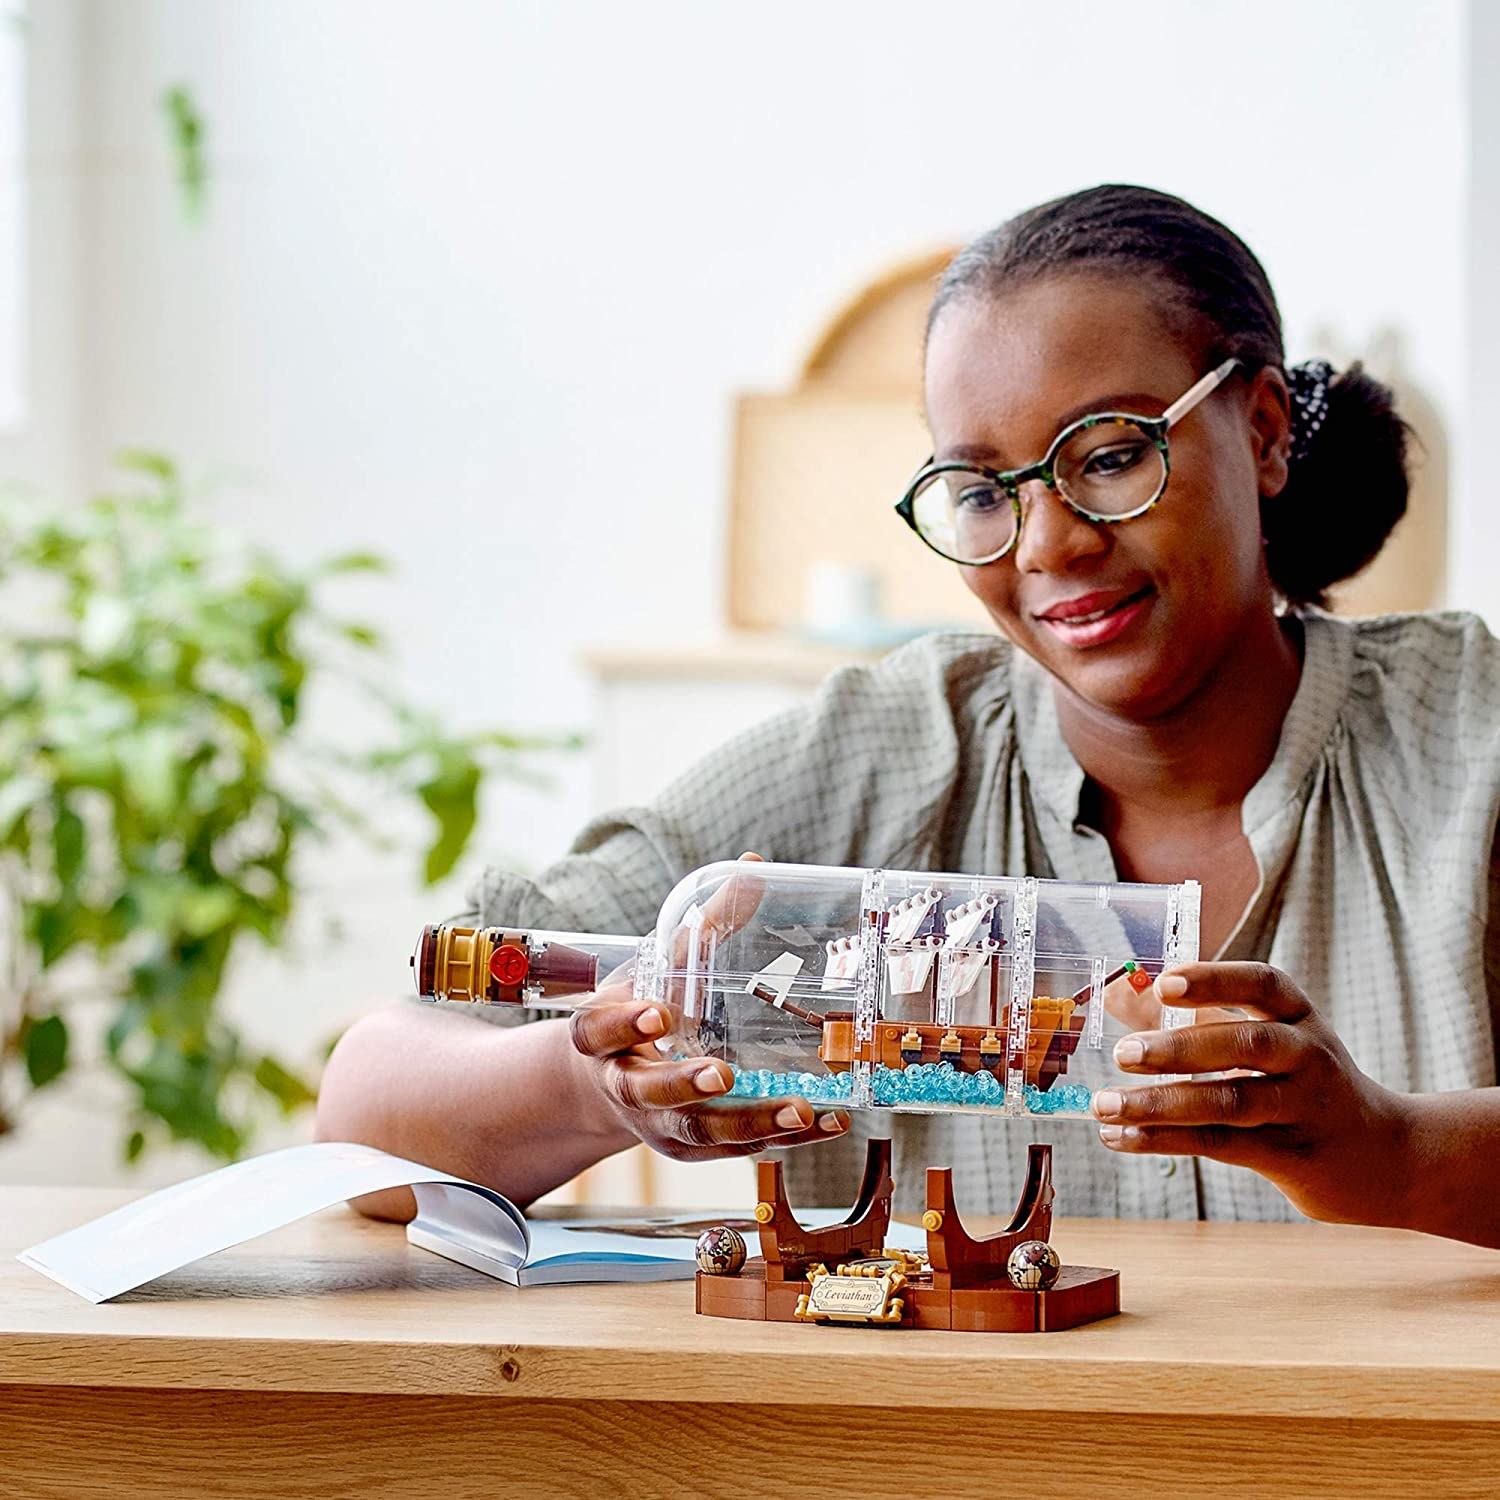 Model holding plastic Lego ship in a bottle toy